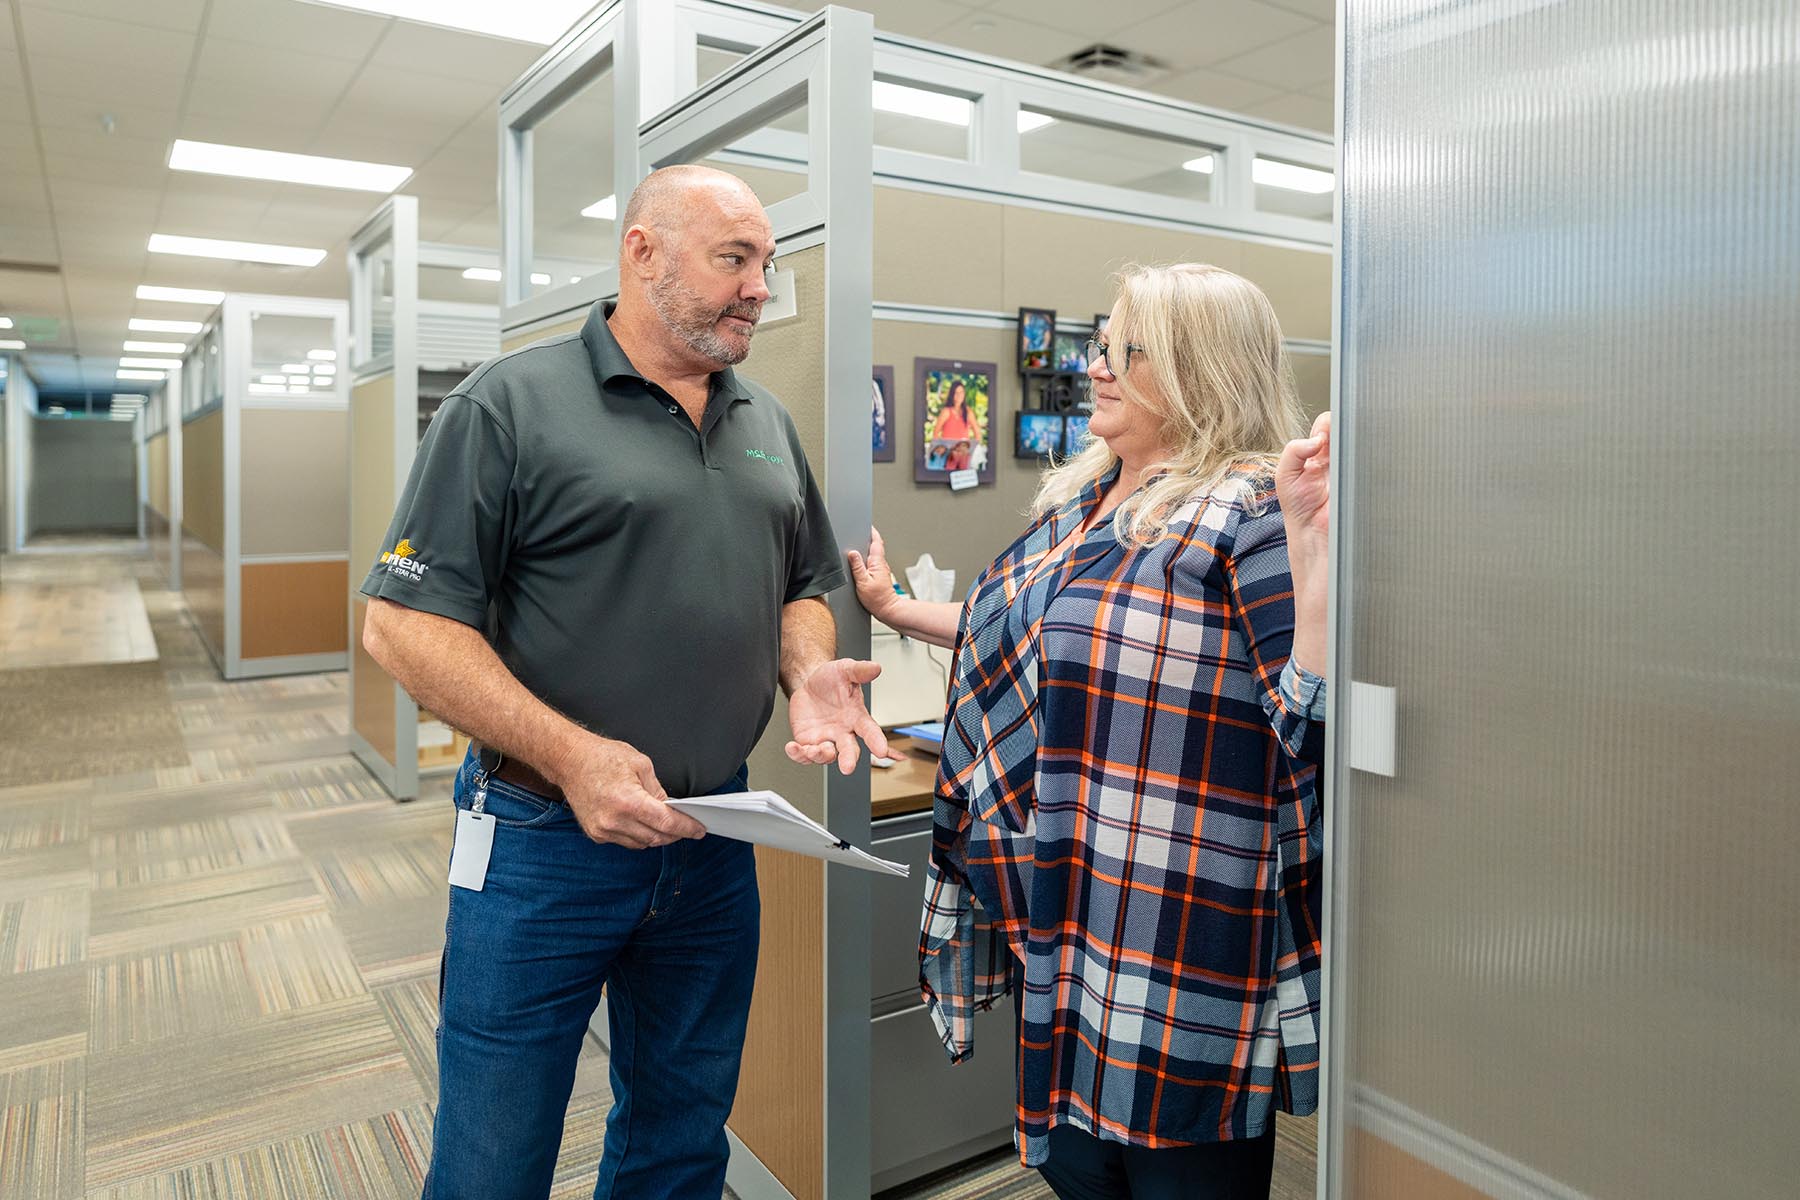 Julie Schirmer, McElroy’s residential HVAC service rep, and Greg Hunsicker, leader of the McElroy’s residential HVAC team, discuss a customer service call.